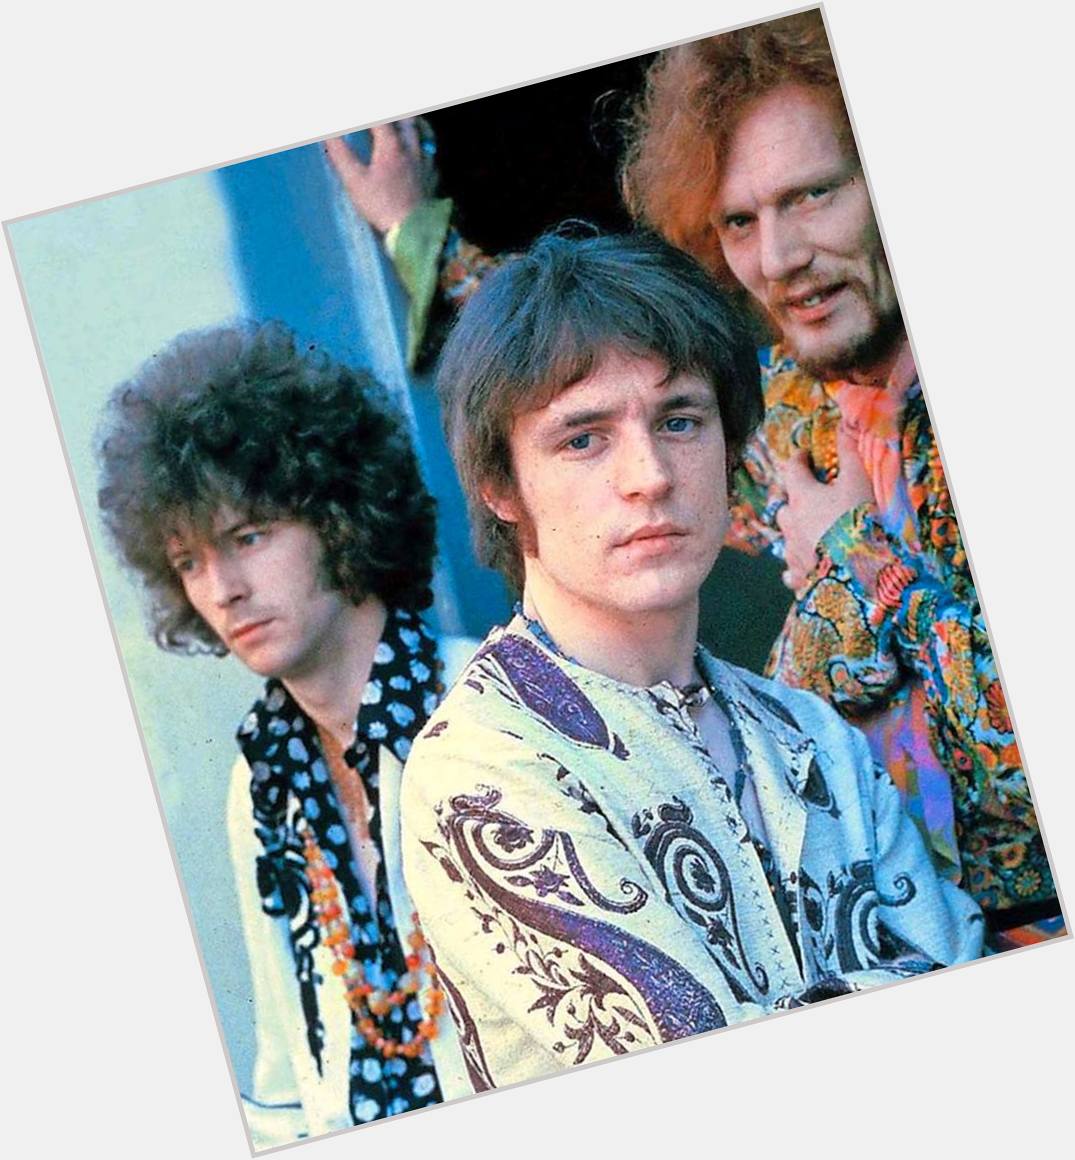 Happy Birthday  to the late Jack Bruce of CREAM! (May 14, 1943 October, 25, 2014)  Rest in peace. 